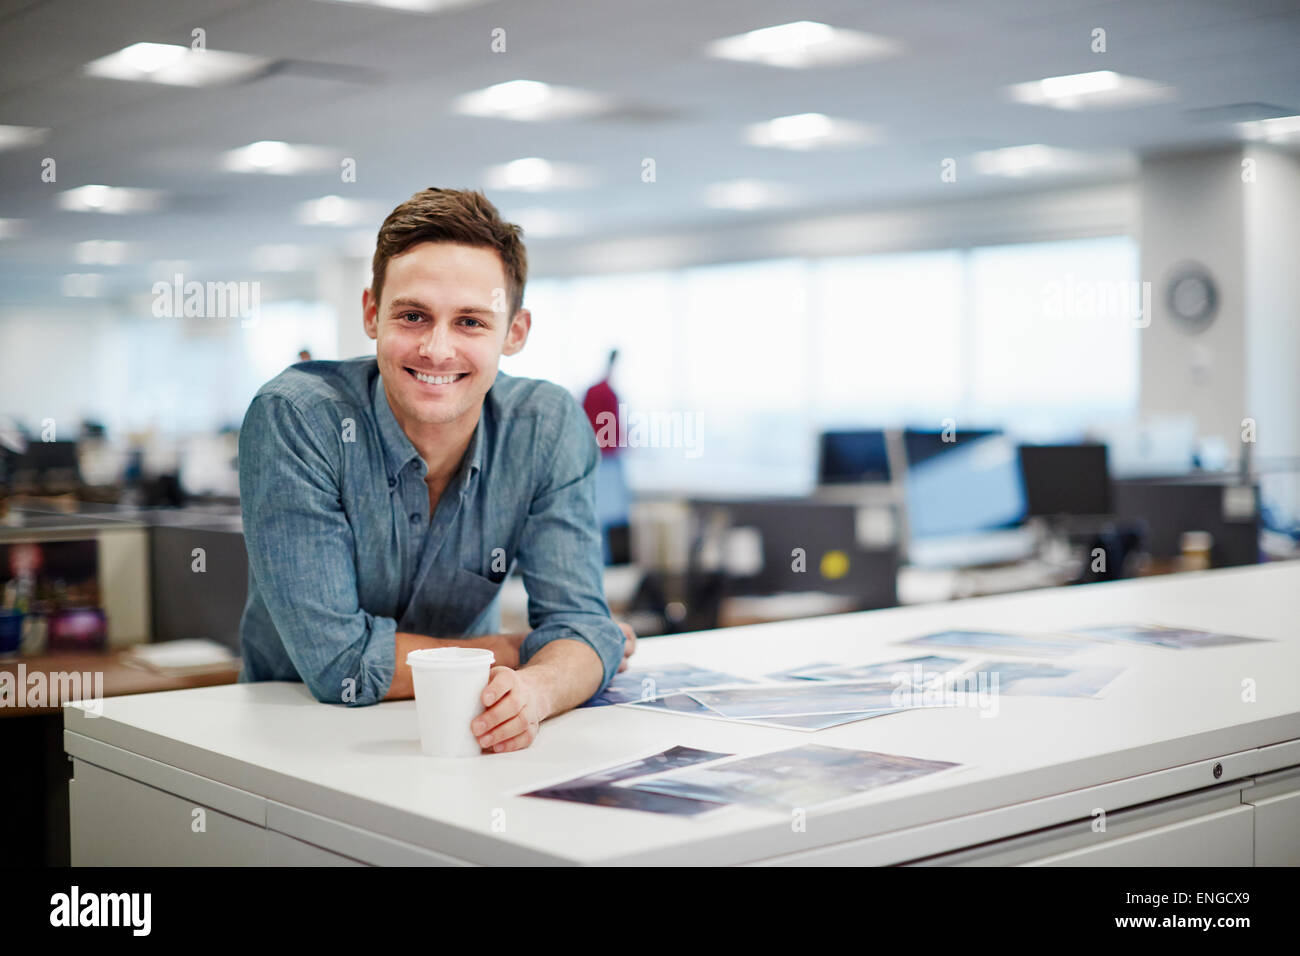 A man smiling and leaning forward on his desk. Stock Photo